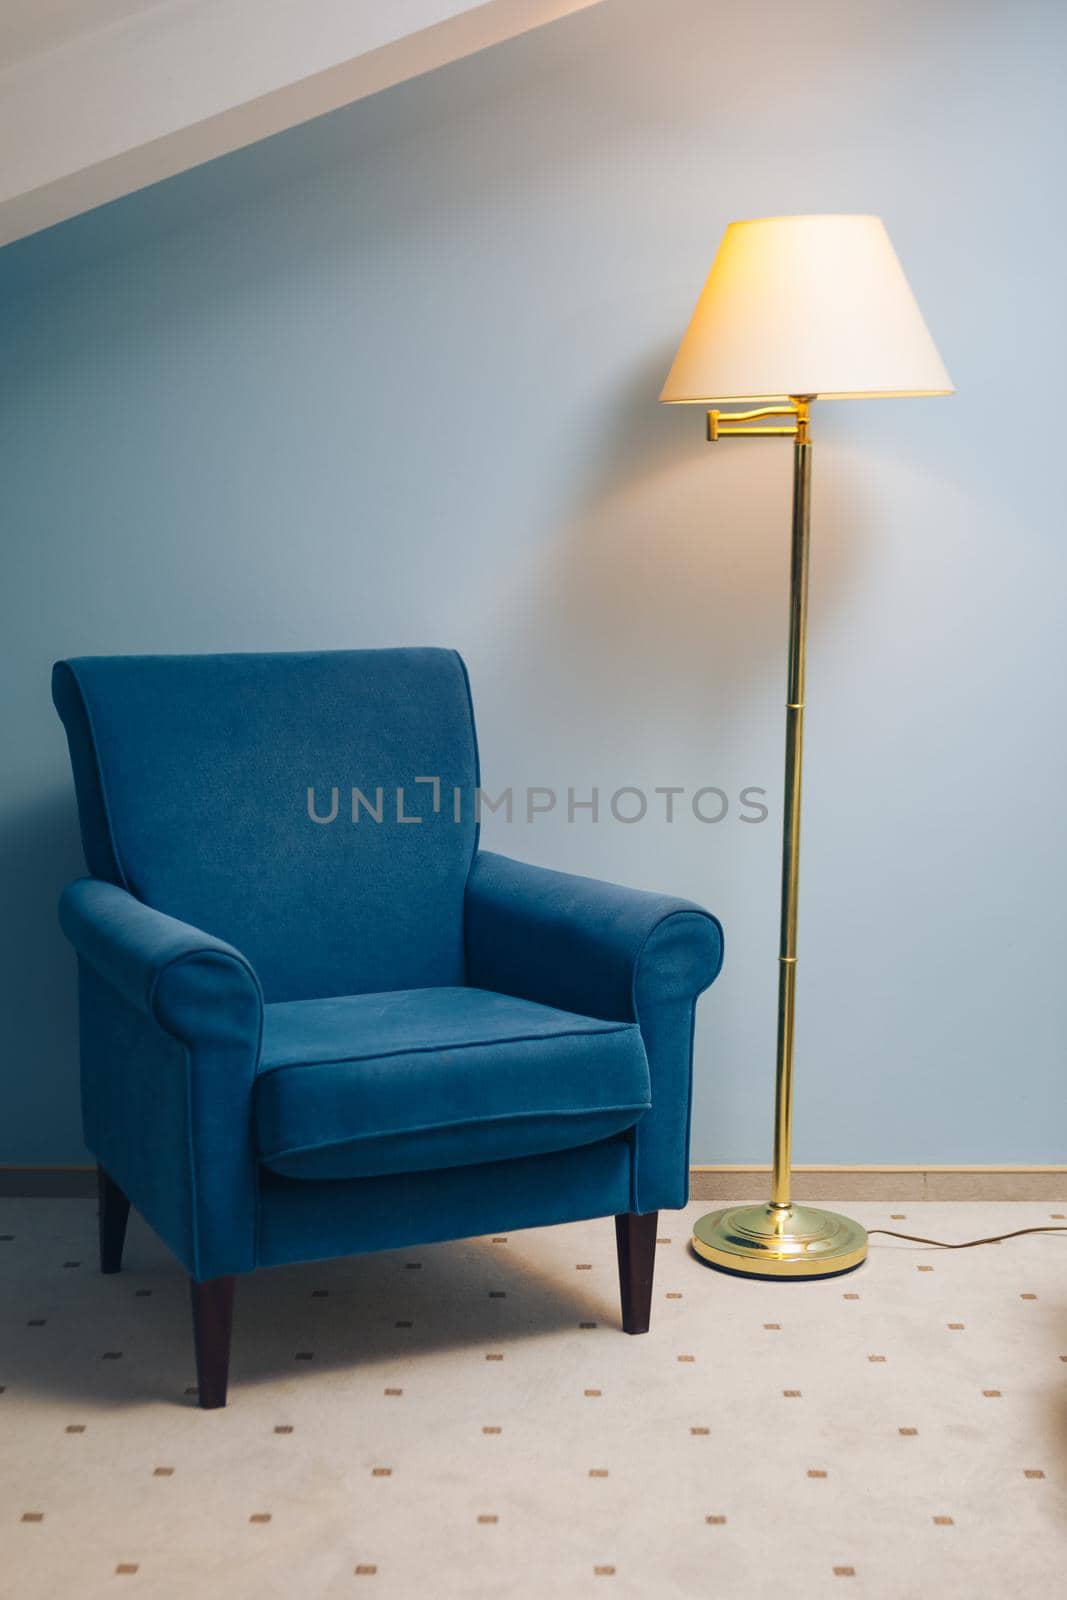 lamp light with chair on blue background  by nikkytok